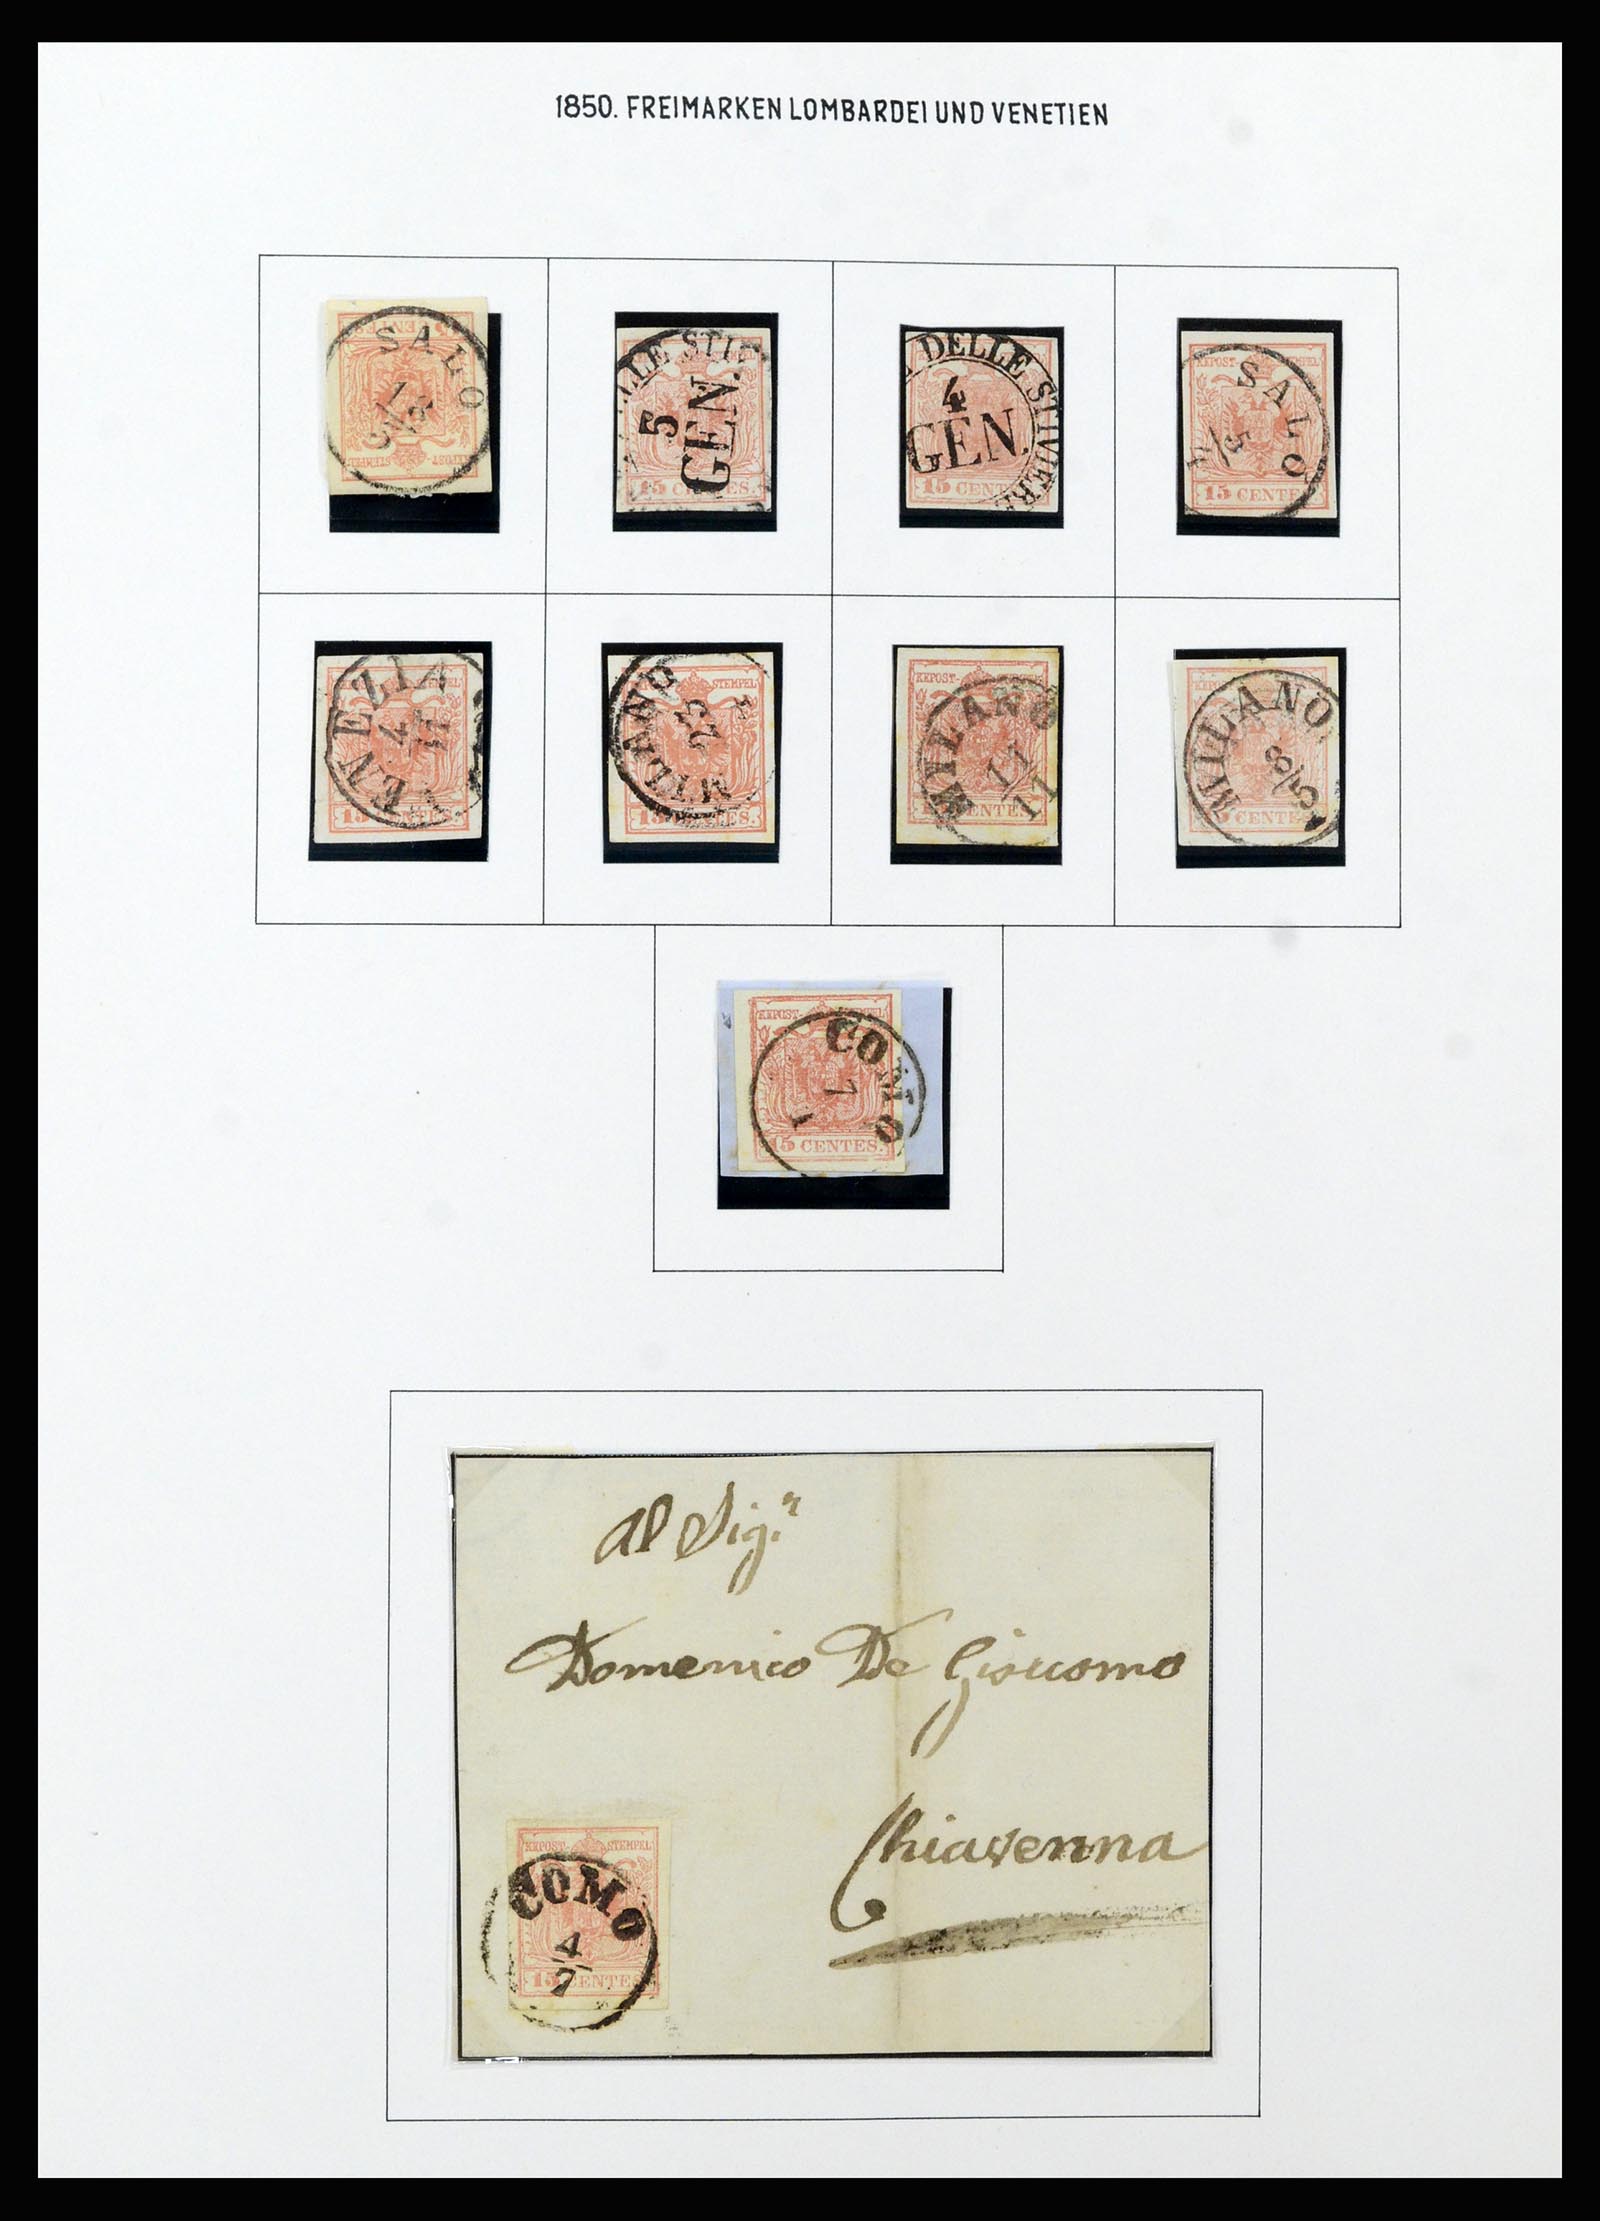 37153 004 - Stamp collection 37153 Lombardy-Venetia 1850-1864.